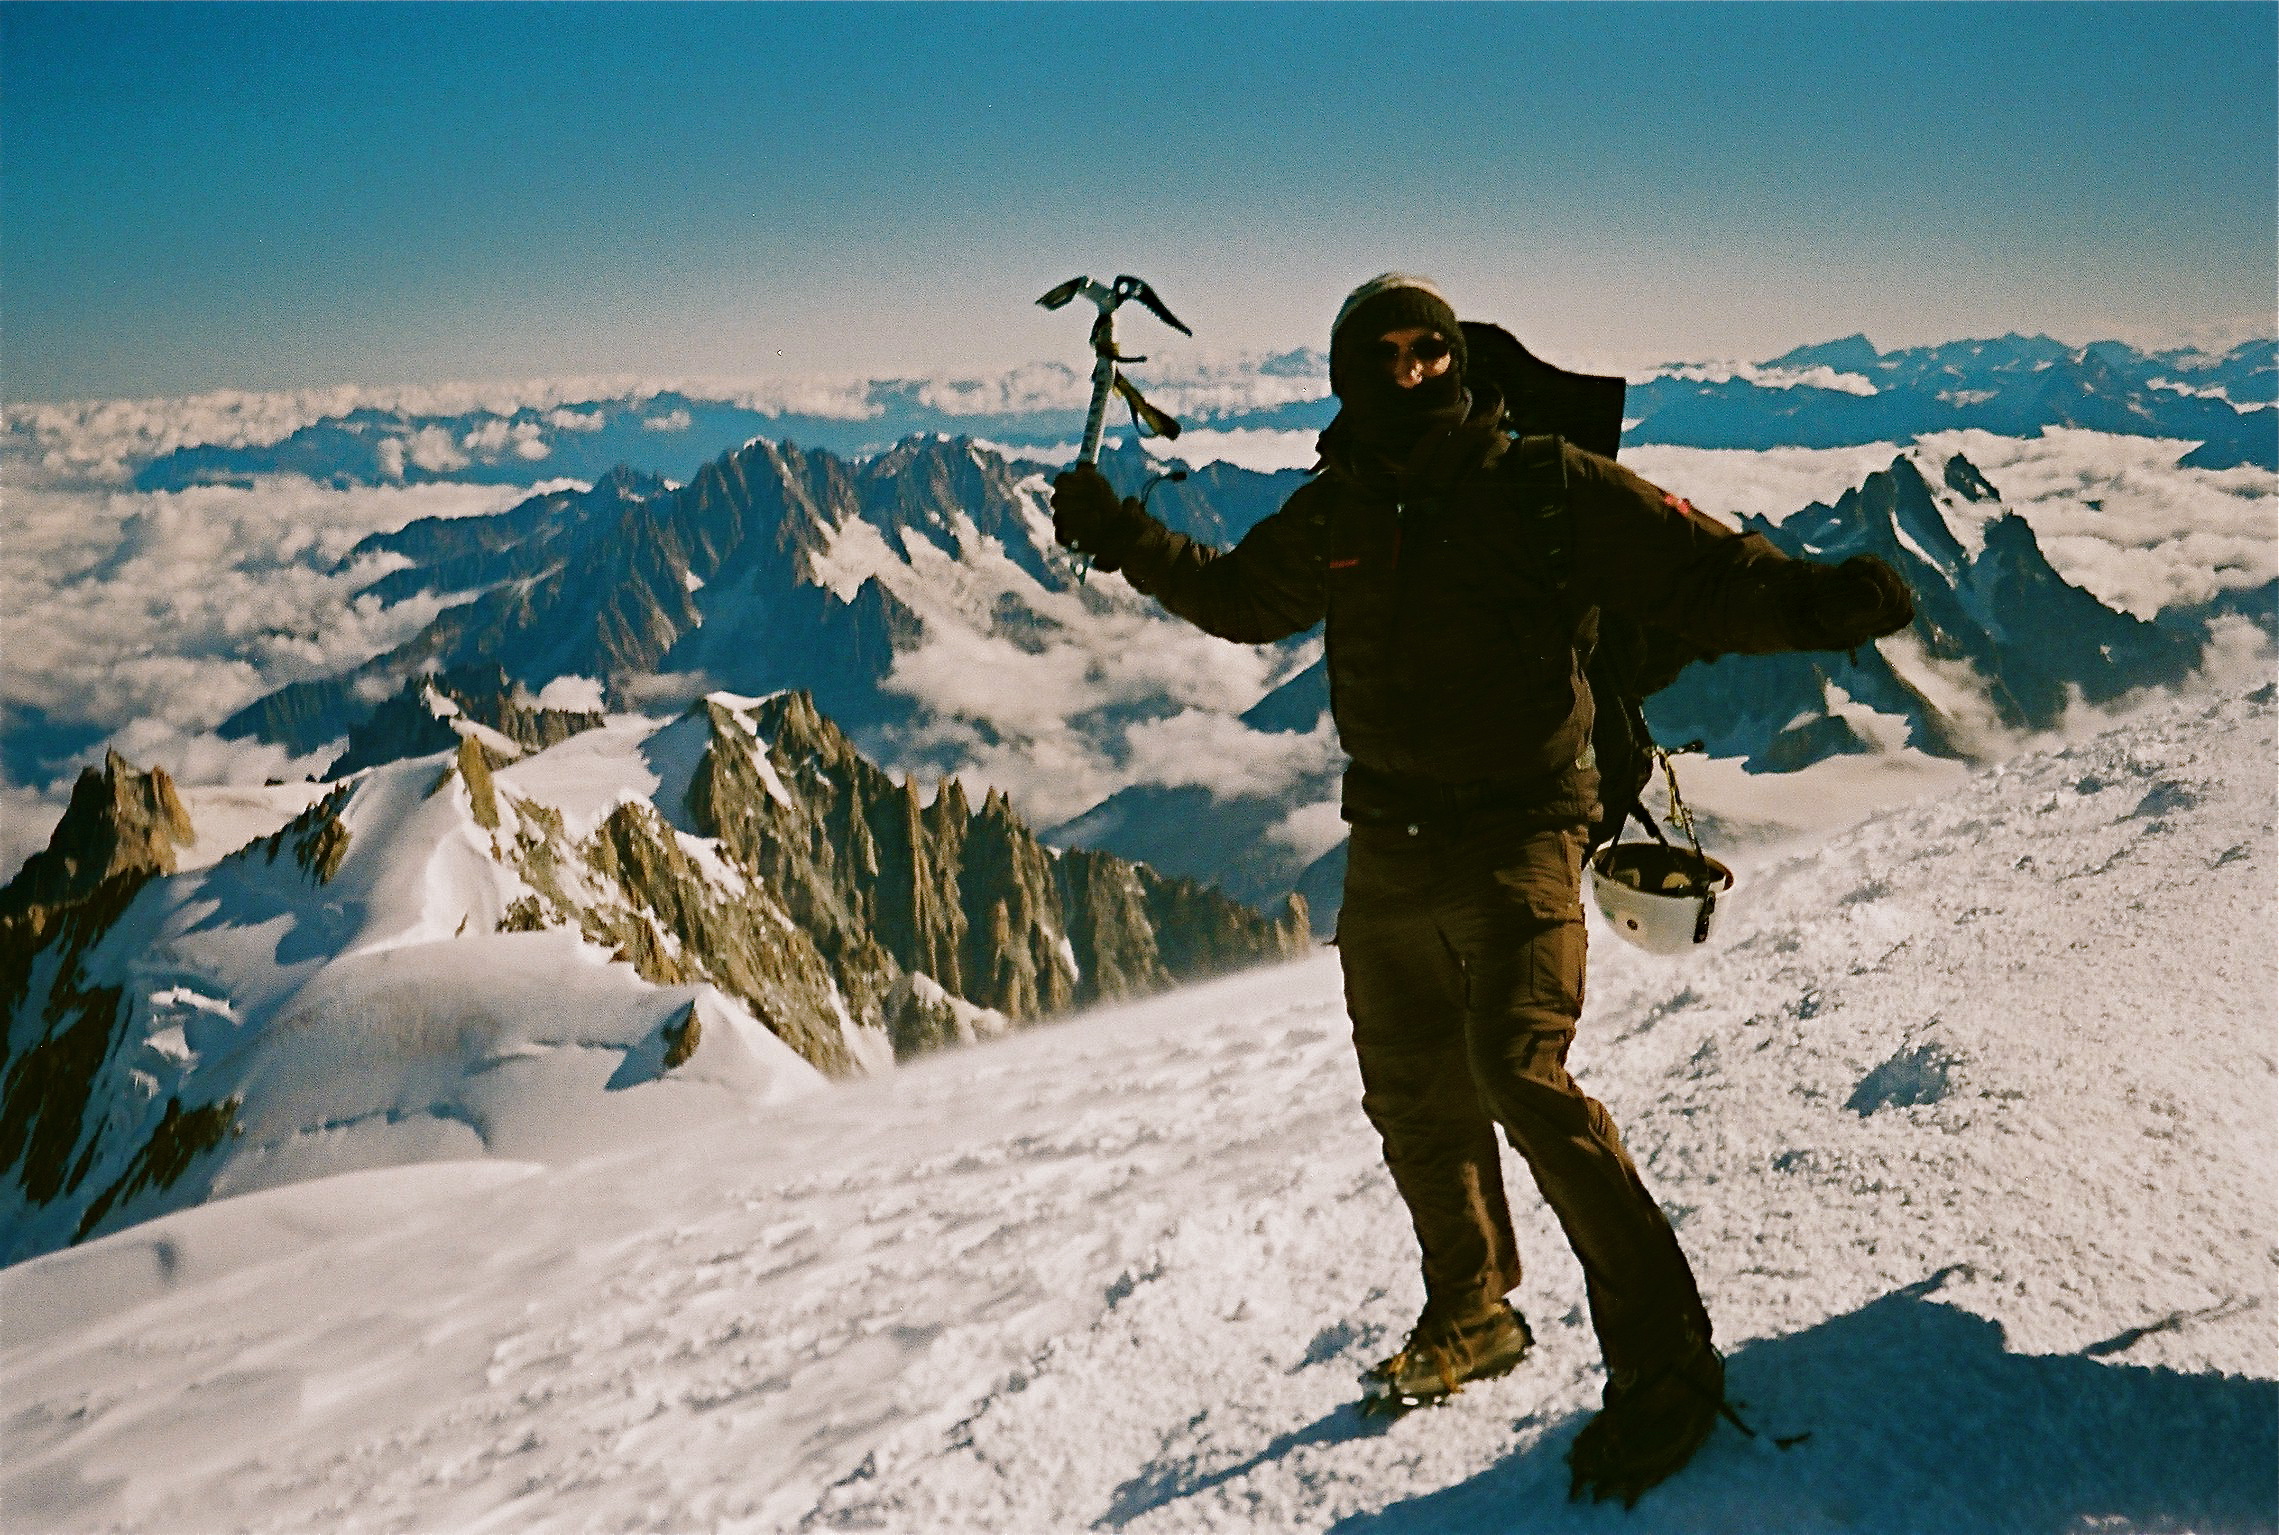 Francis Tapon on the summit of Mont Blanc 4,810 meters (15,781 feet).